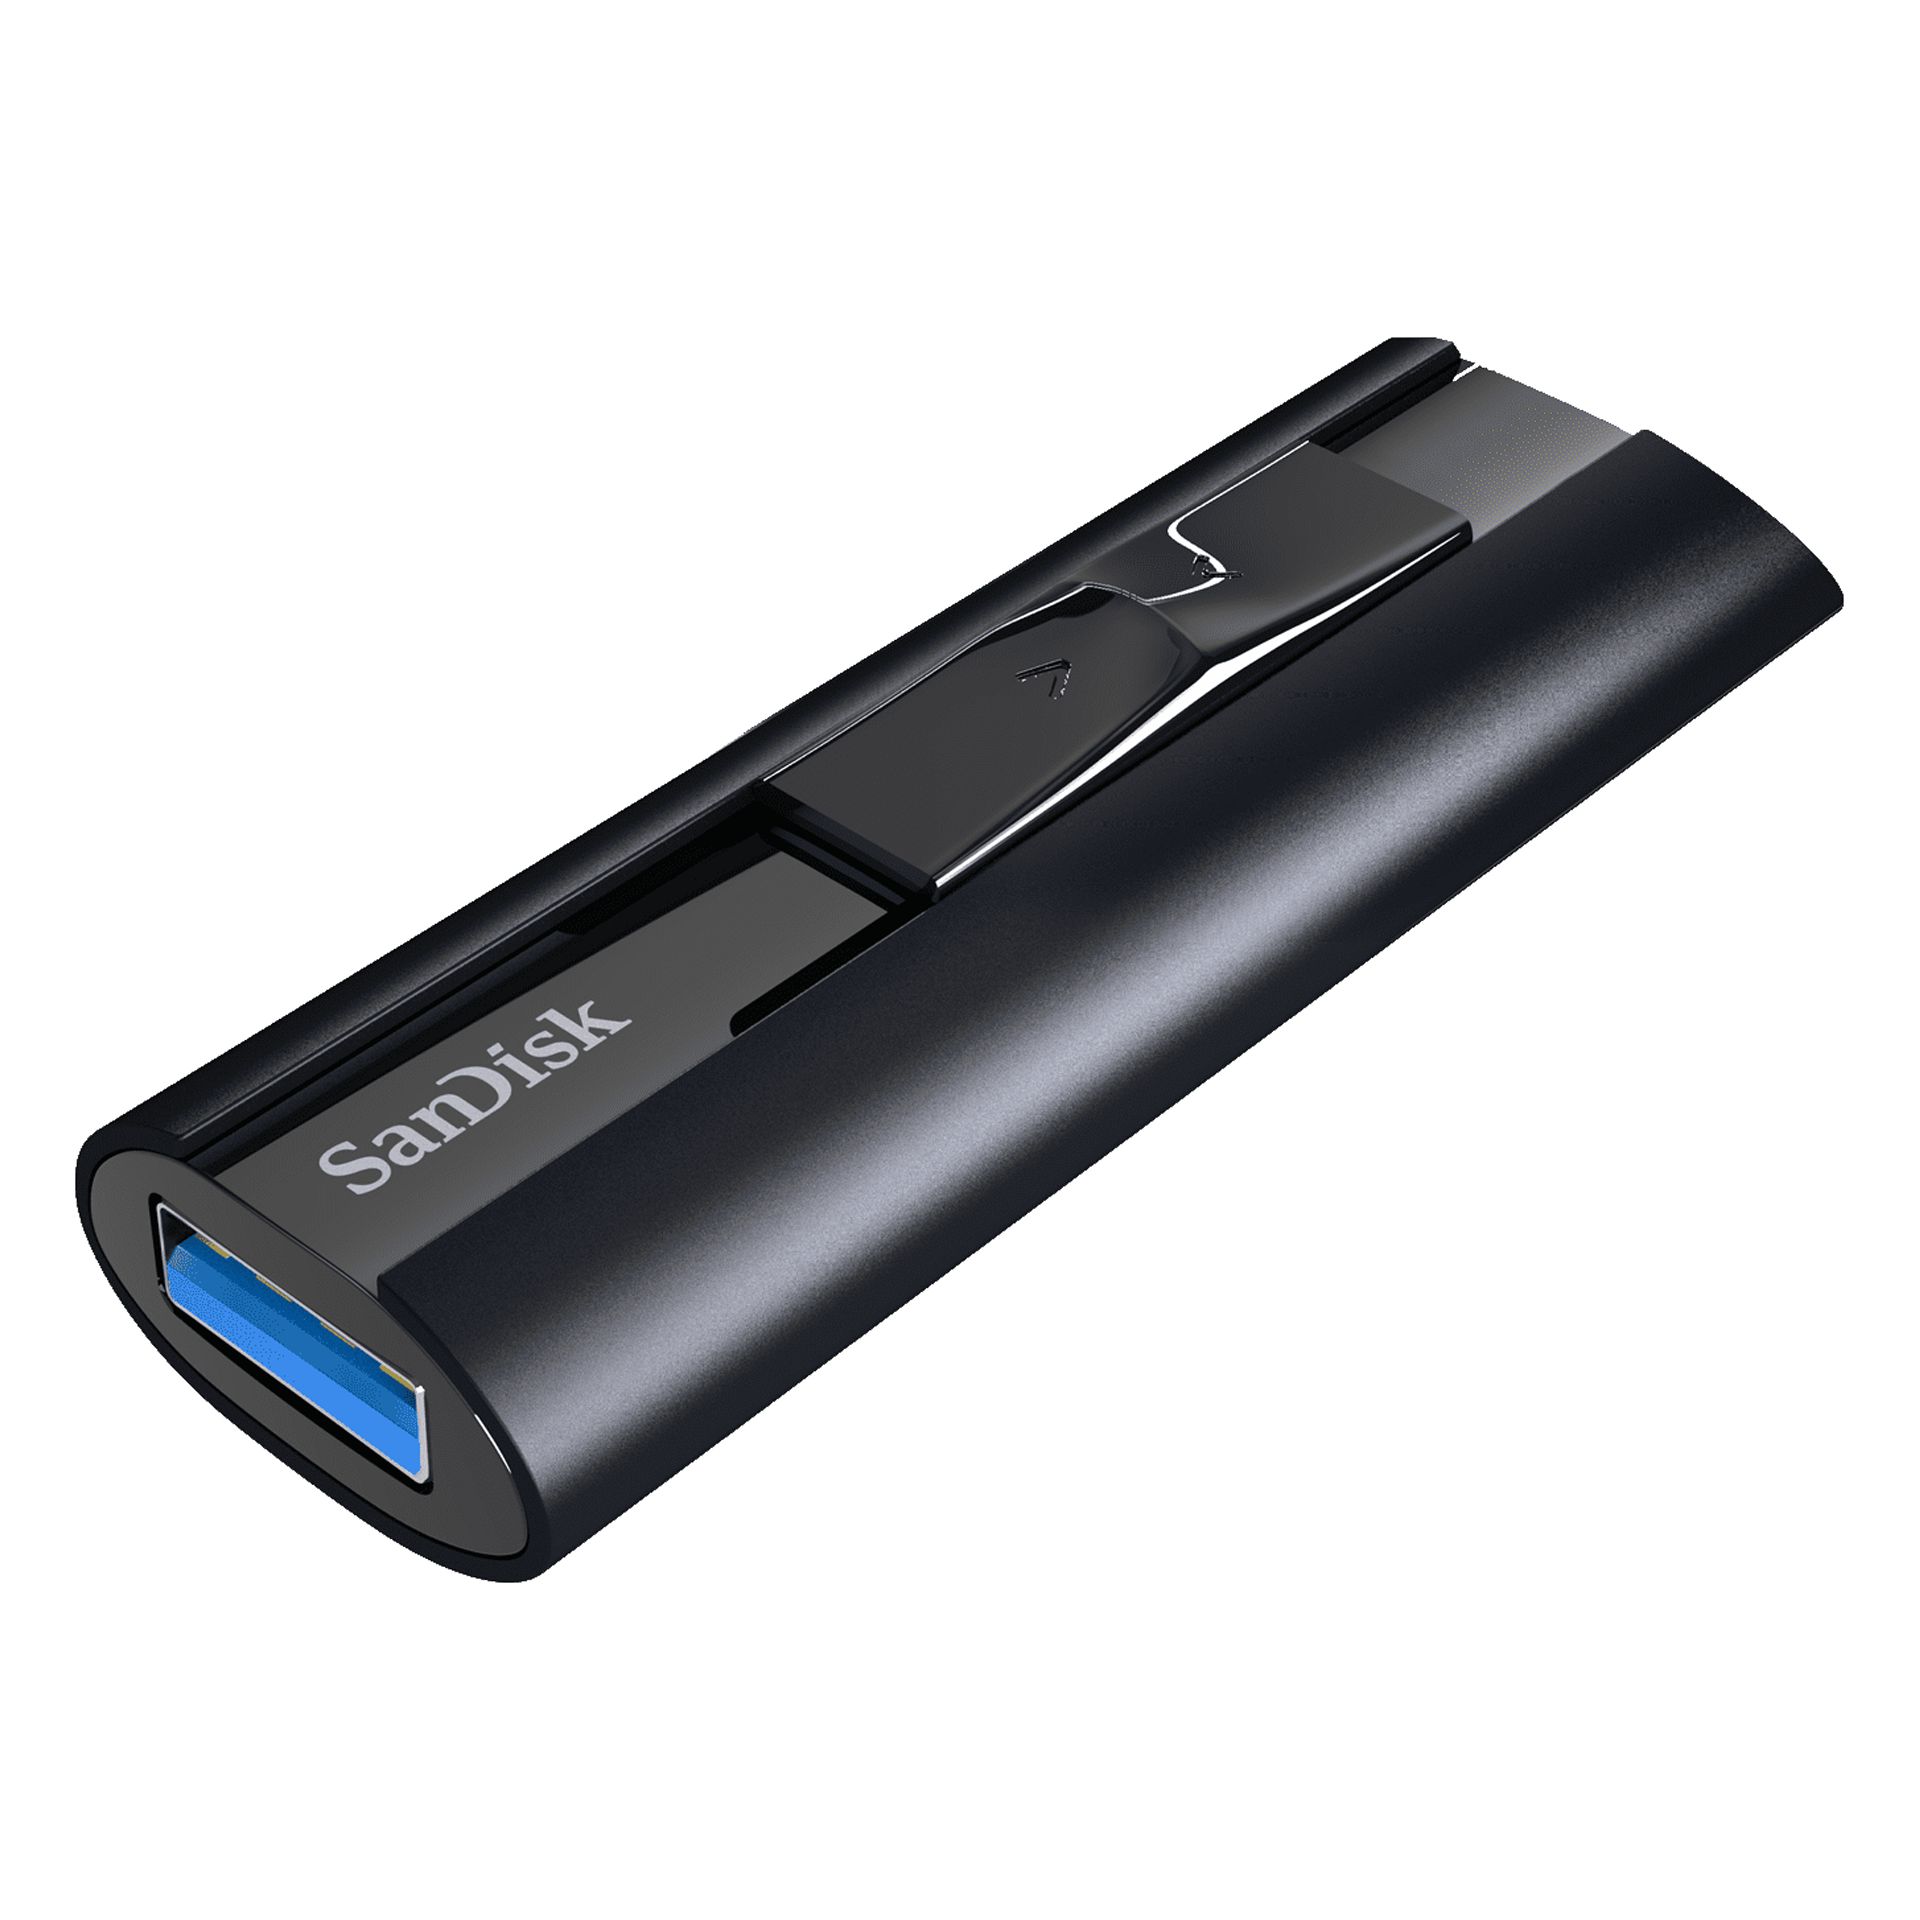 SanDisk 1TB Extreme PRO USB 3.2 Solid State Flash Drive - SDCZ880-1T00-G46 - image 2 of 4